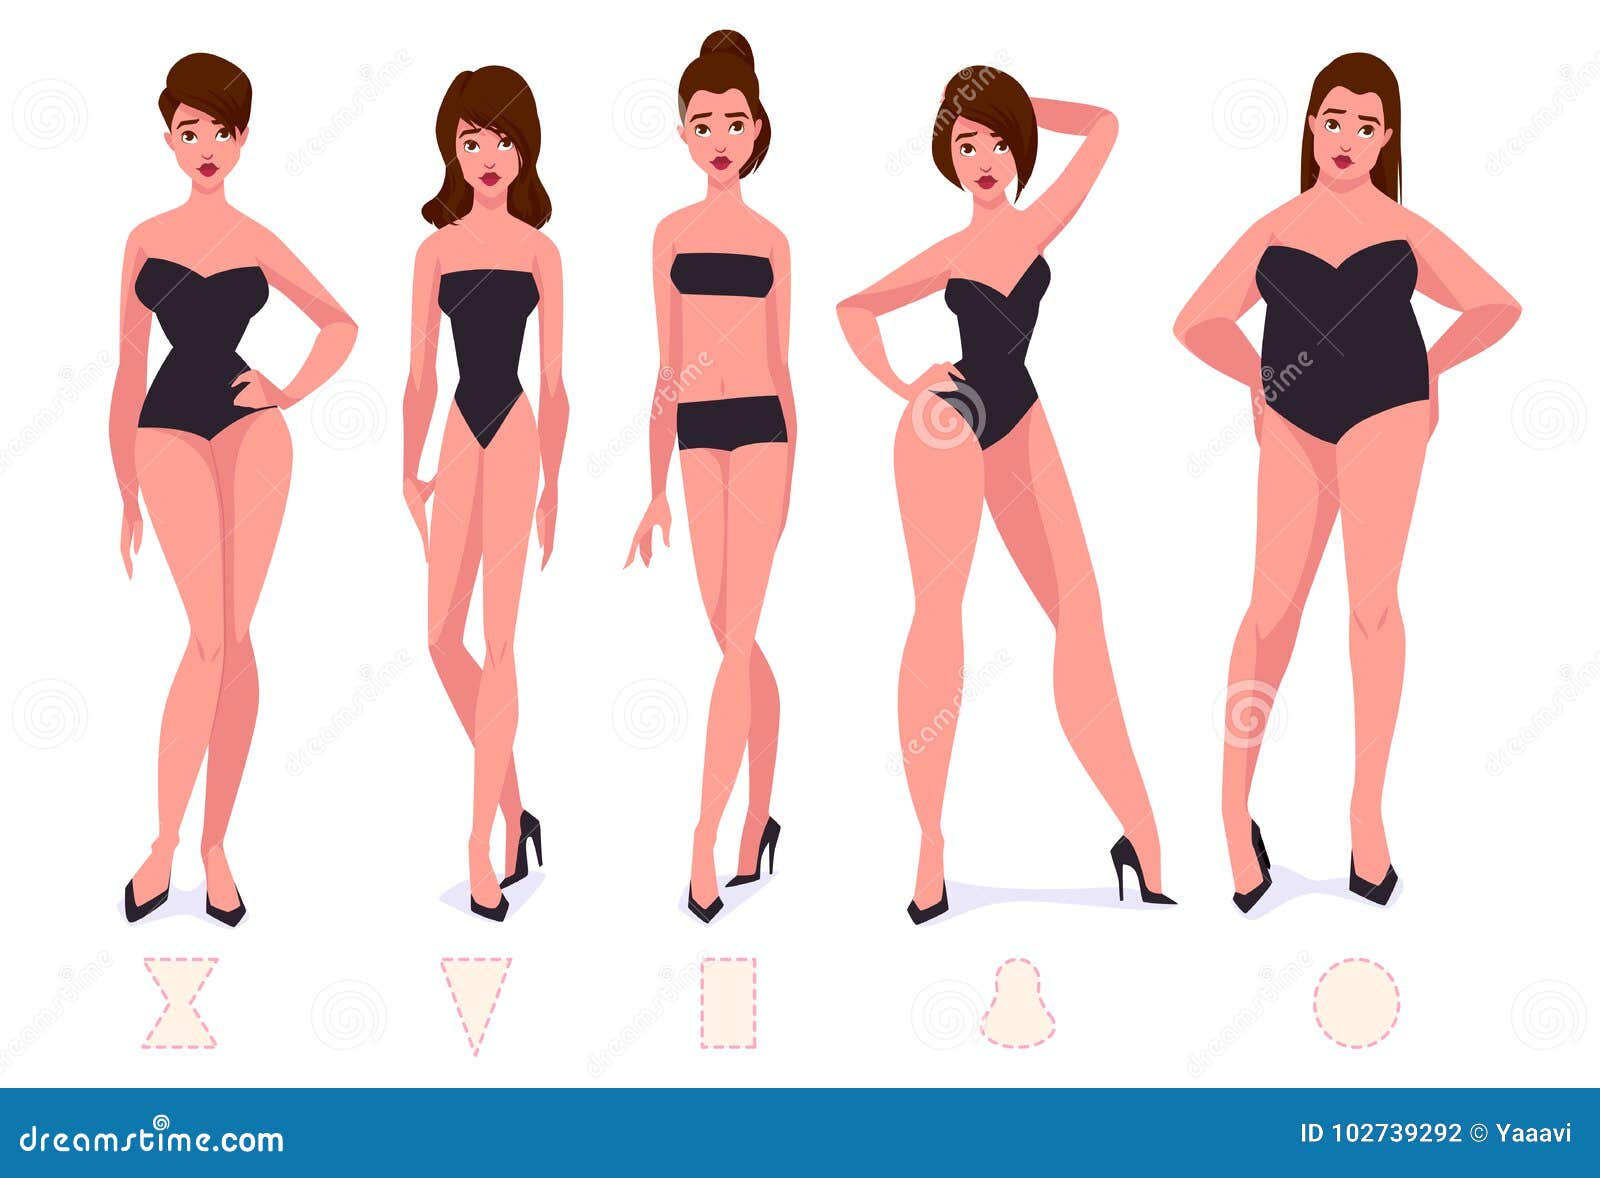 Real Life Body Shapes - X  Body shapes, Inside out style, Pear